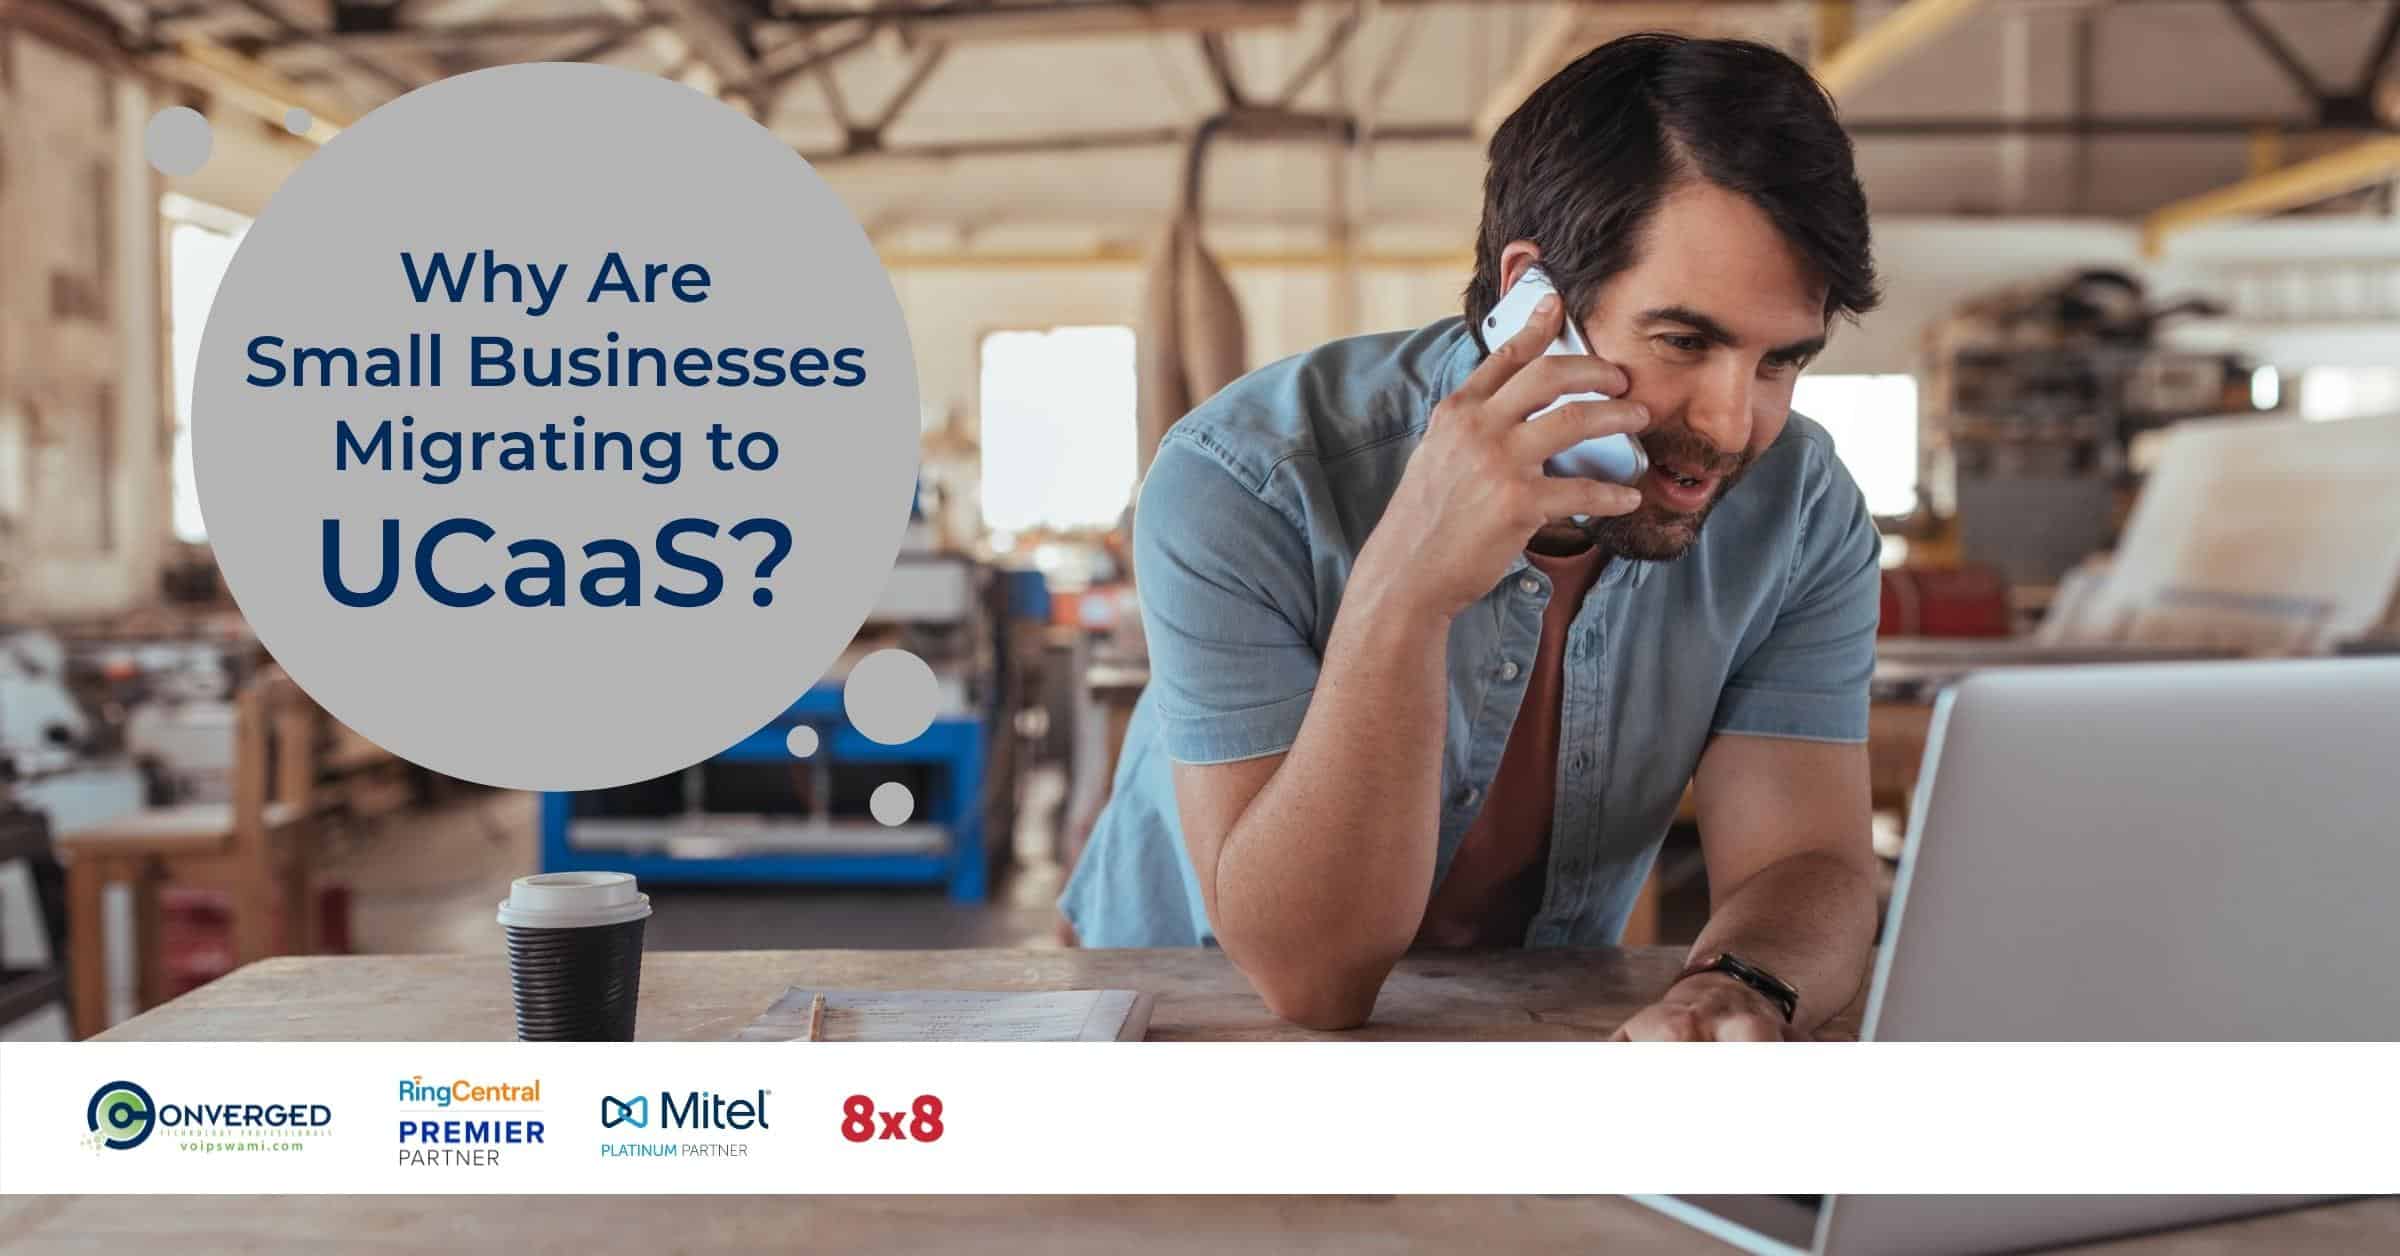 Why are Small Businesses Migrating to UCaaS